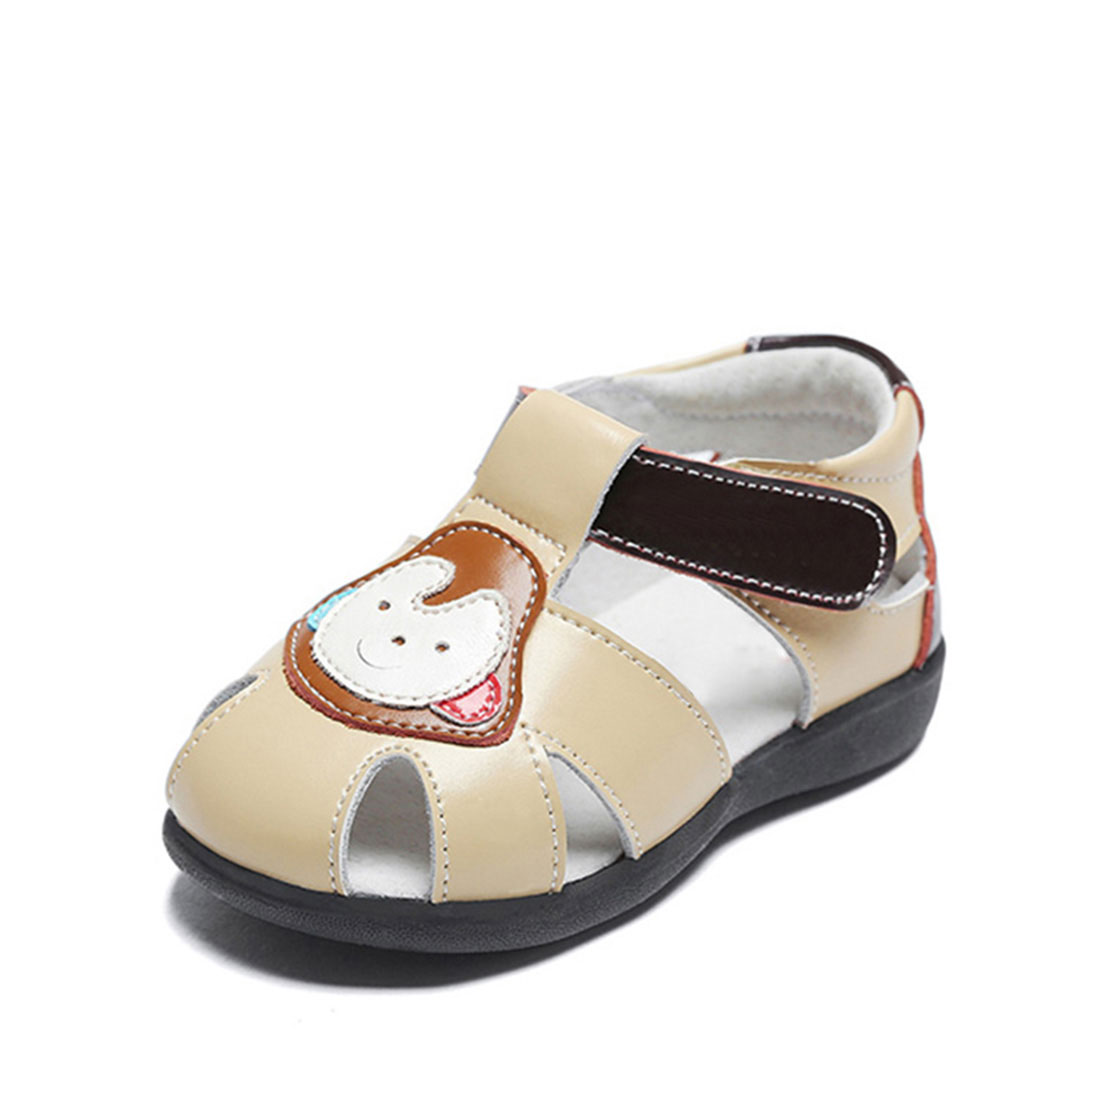 Real leather bone beige flat ventilate open toe casual style kid sandals shoes